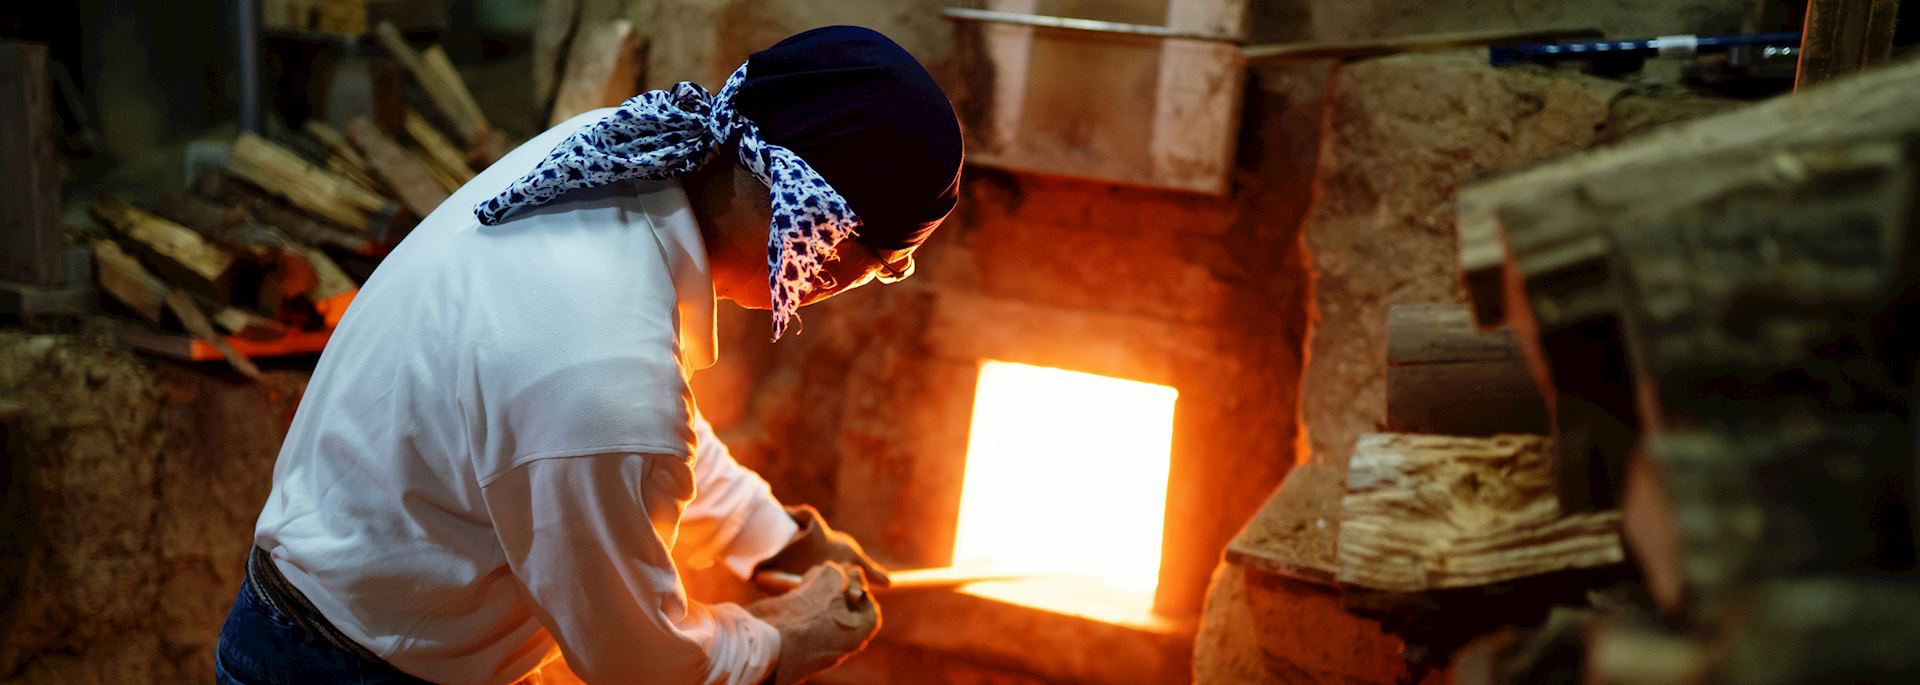 A master potter feeds wood to the kiln